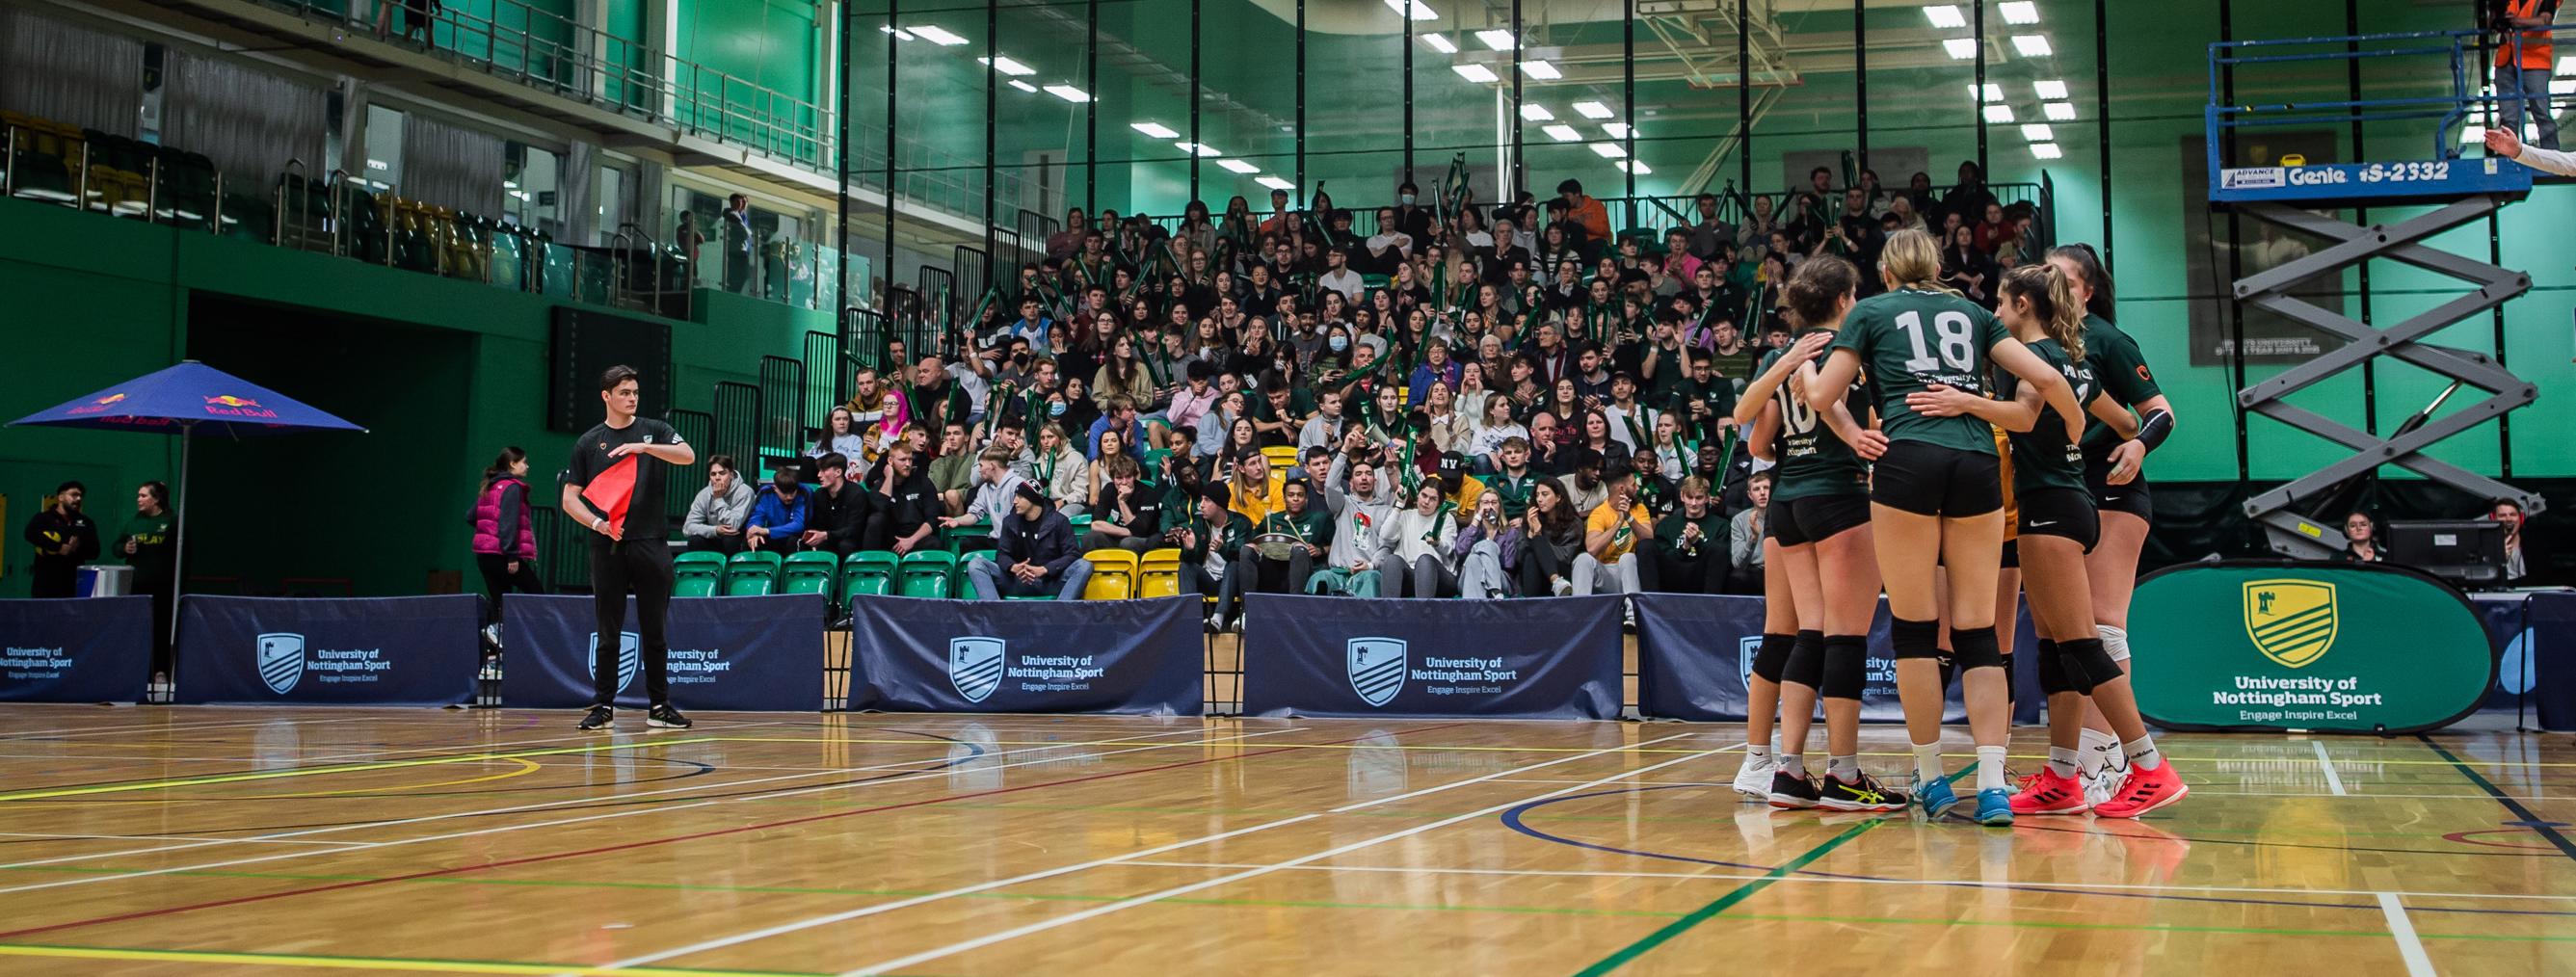 University of Nottingham Women's Volleyball team in front of the Headliner crowd